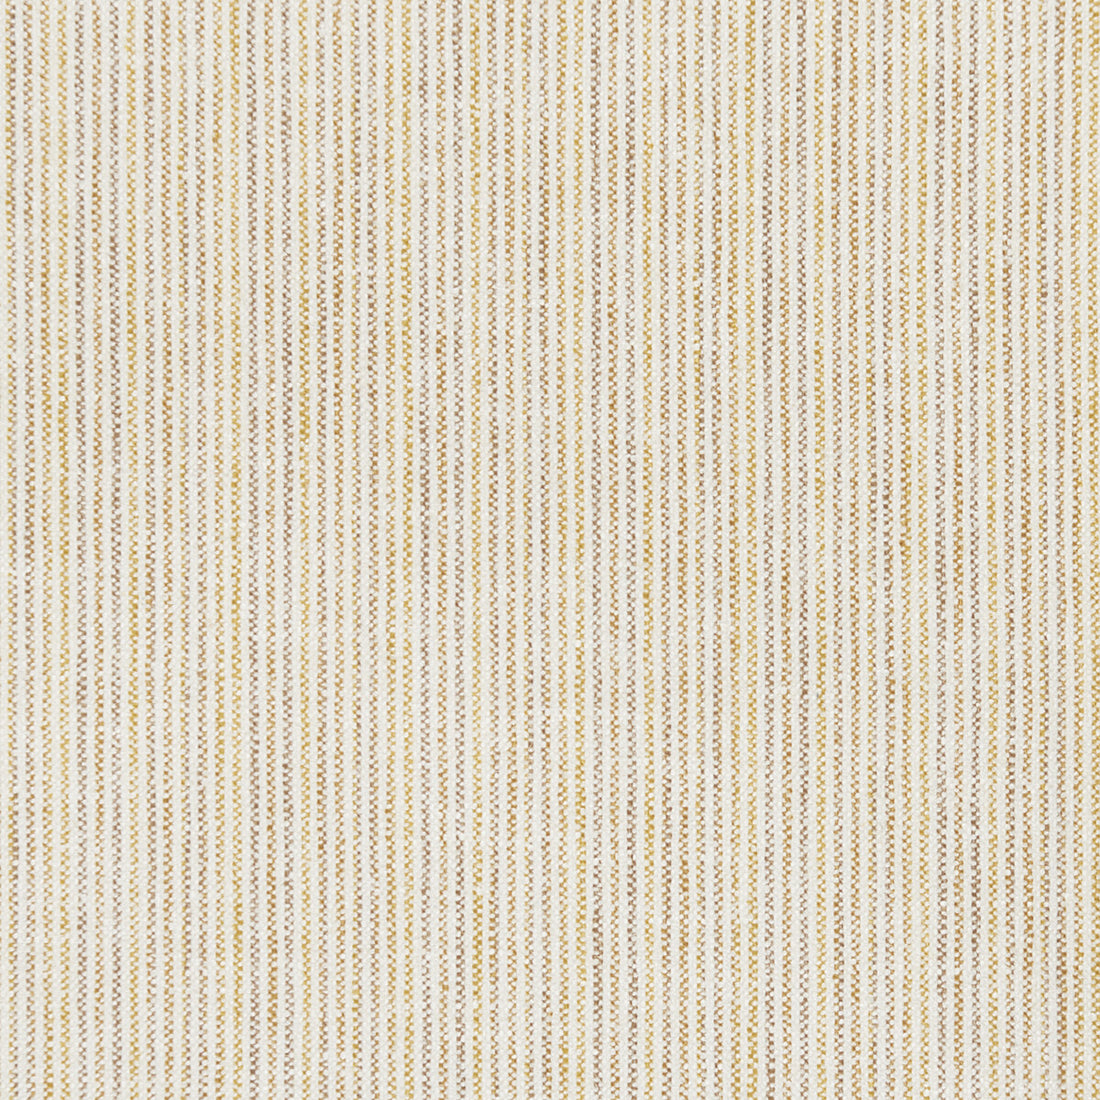 Kravet Basics fabric in 37263-416 color - pattern 37263.416.0 - by Kravet Basics in the Bungalow Chic II collection